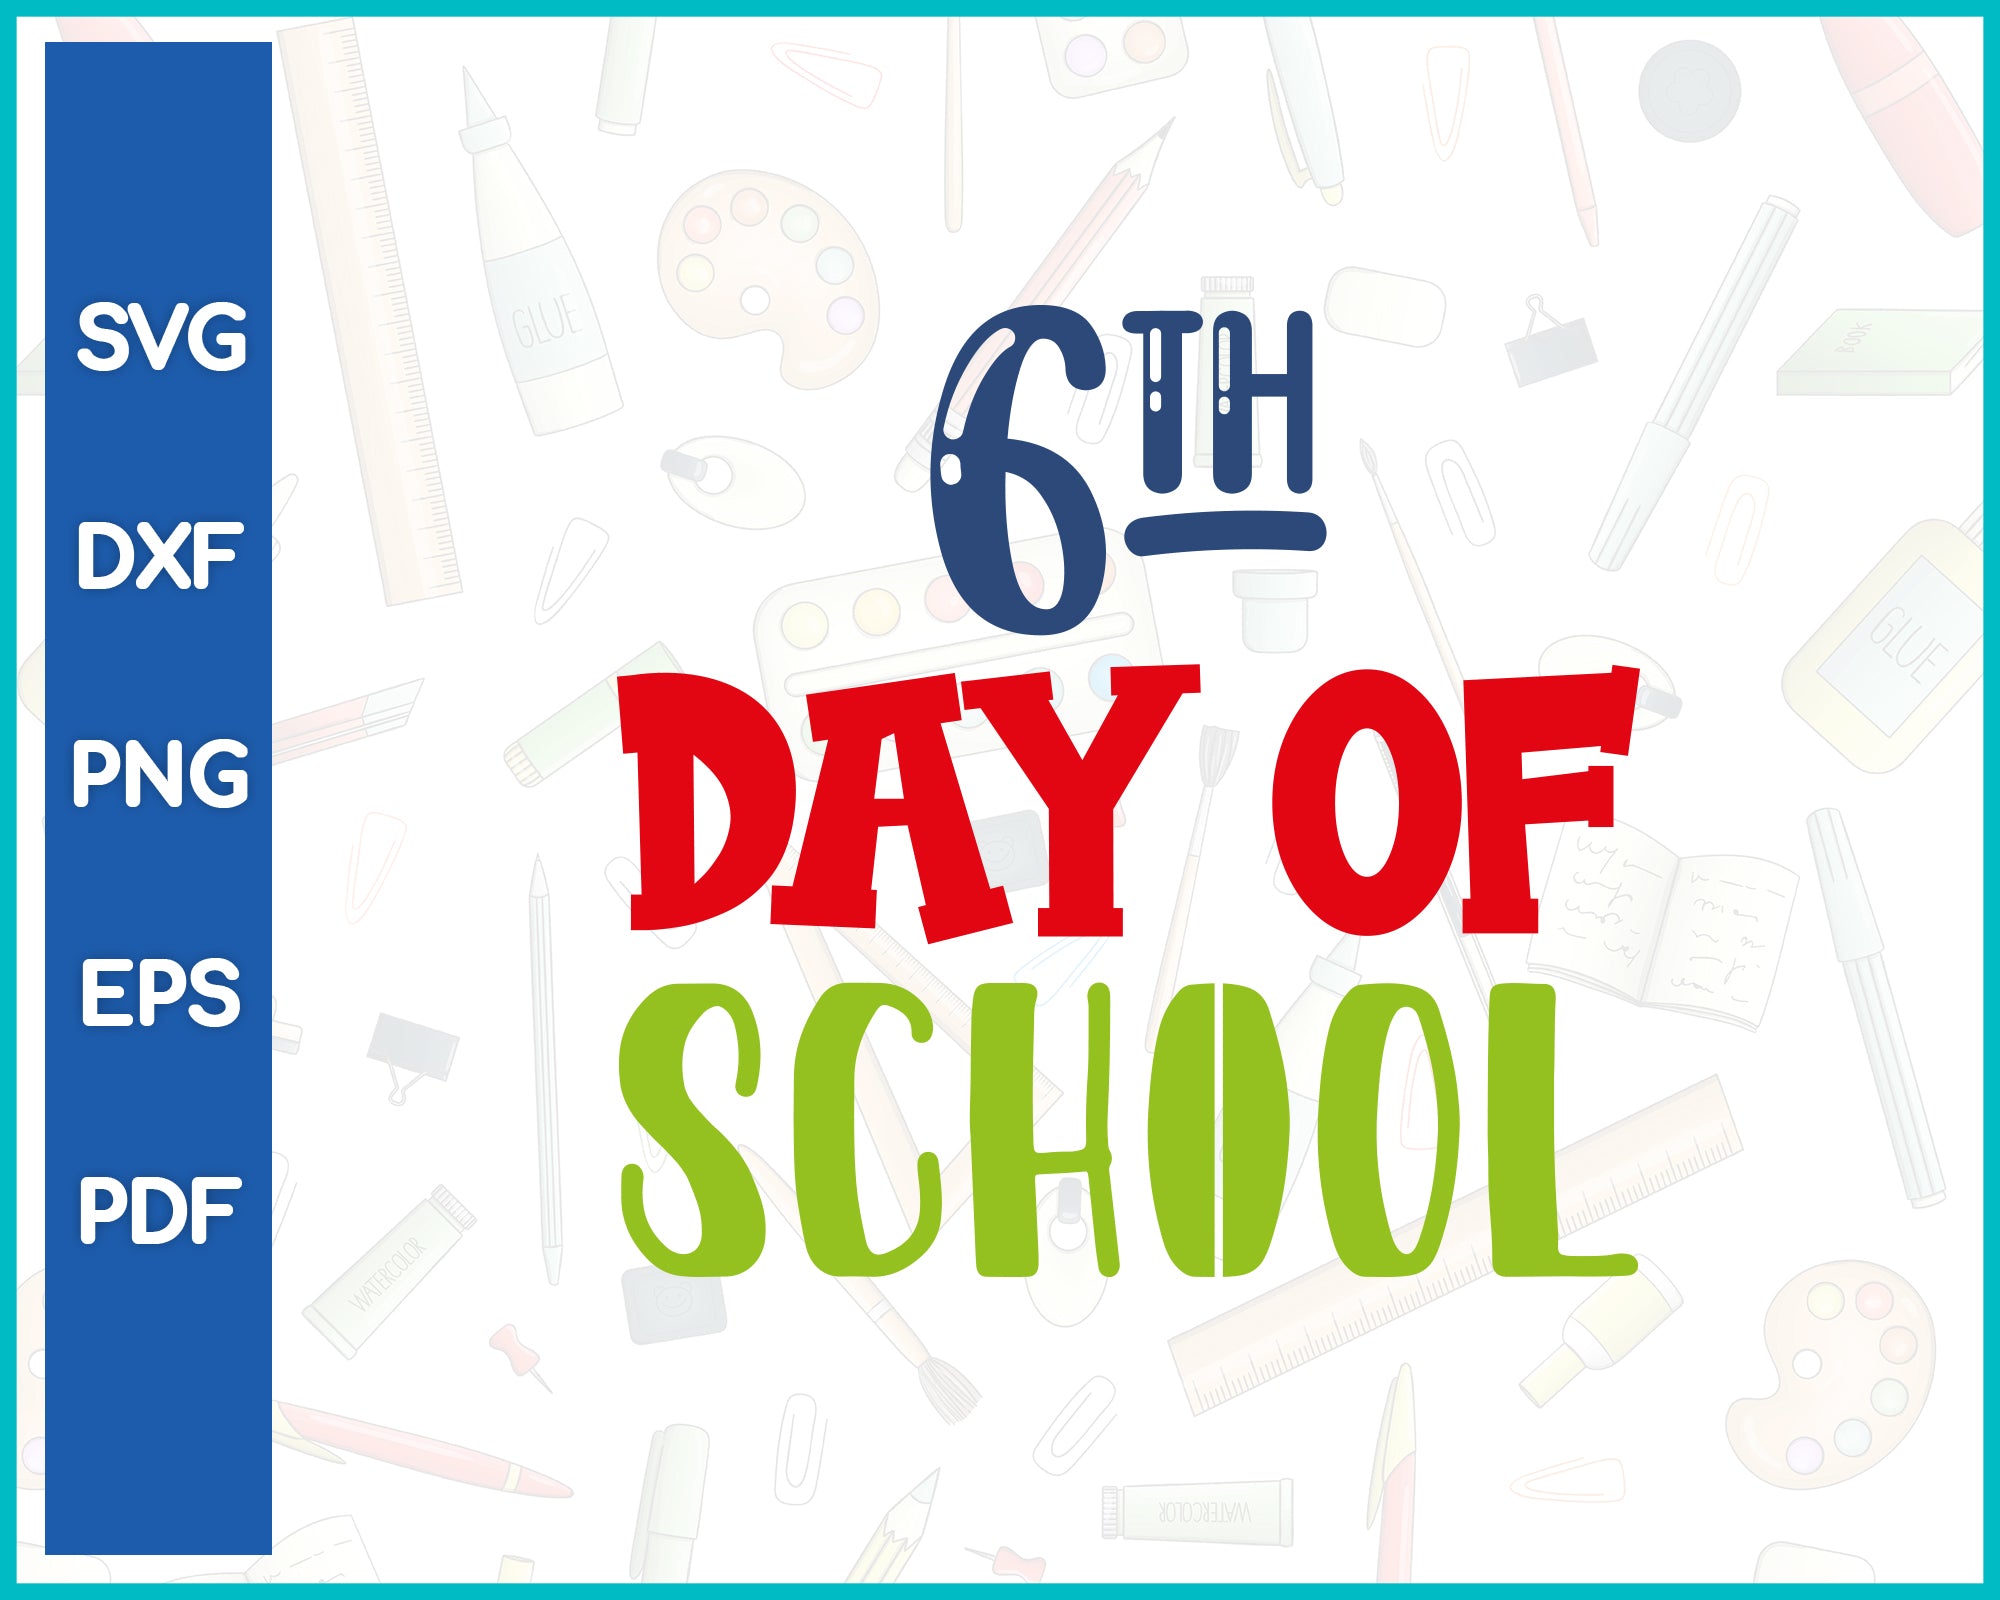 6th Day Of School Teacher Cut File For Cricut svg, dxf, png, eps, pdf Silhouette Printable Files